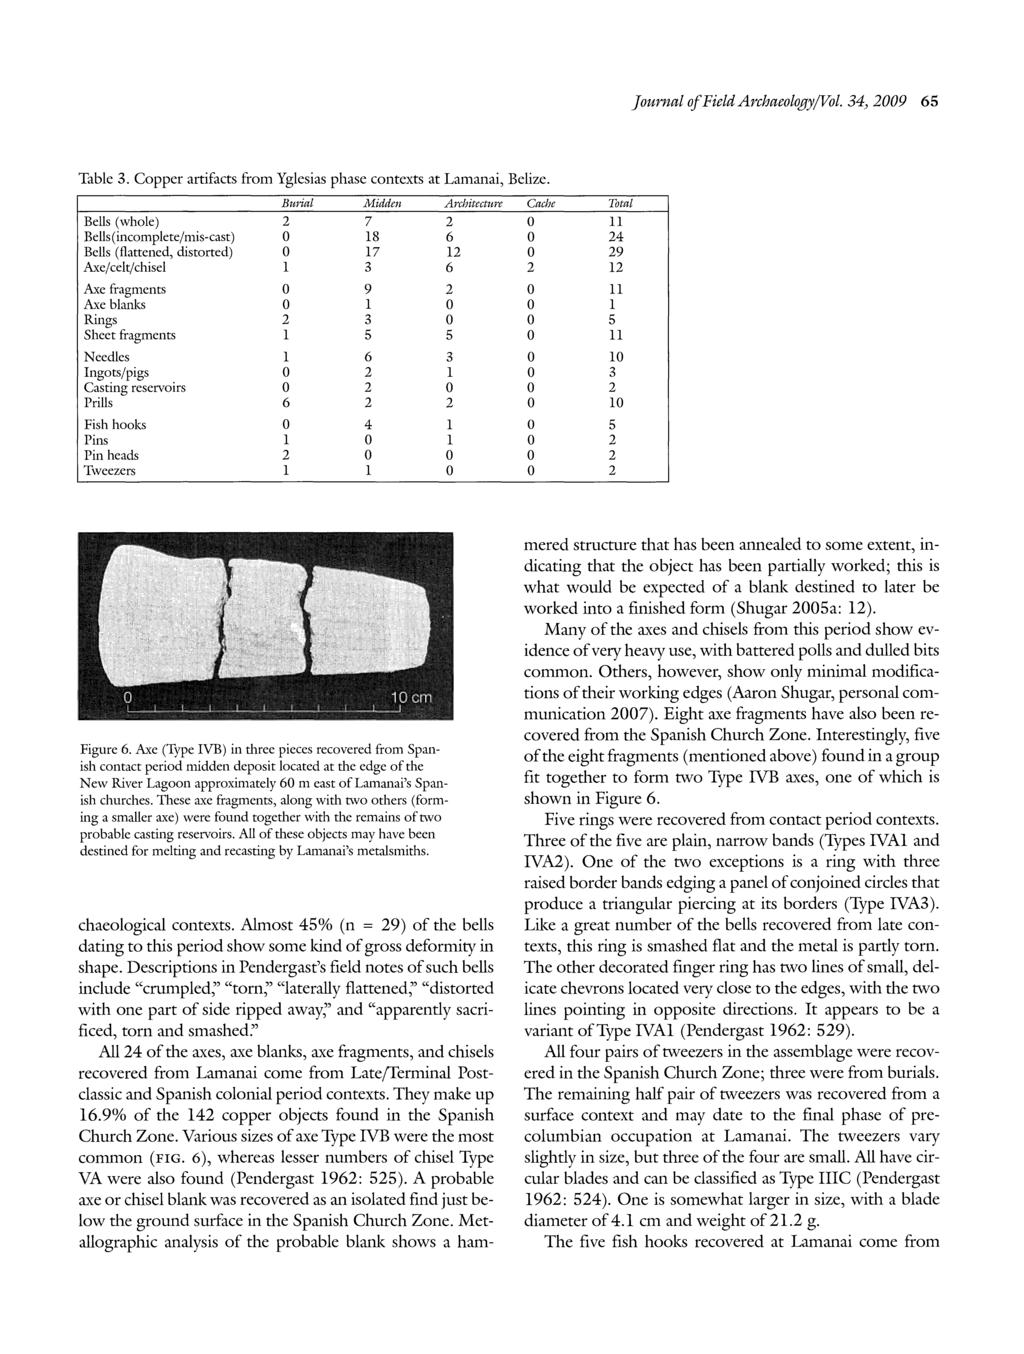 Journal of Field ArchaeologyjVol. 34) 2009 65 Table 3. Copper artifacts from Yglesias phase contexts at Lamanai, Belize.